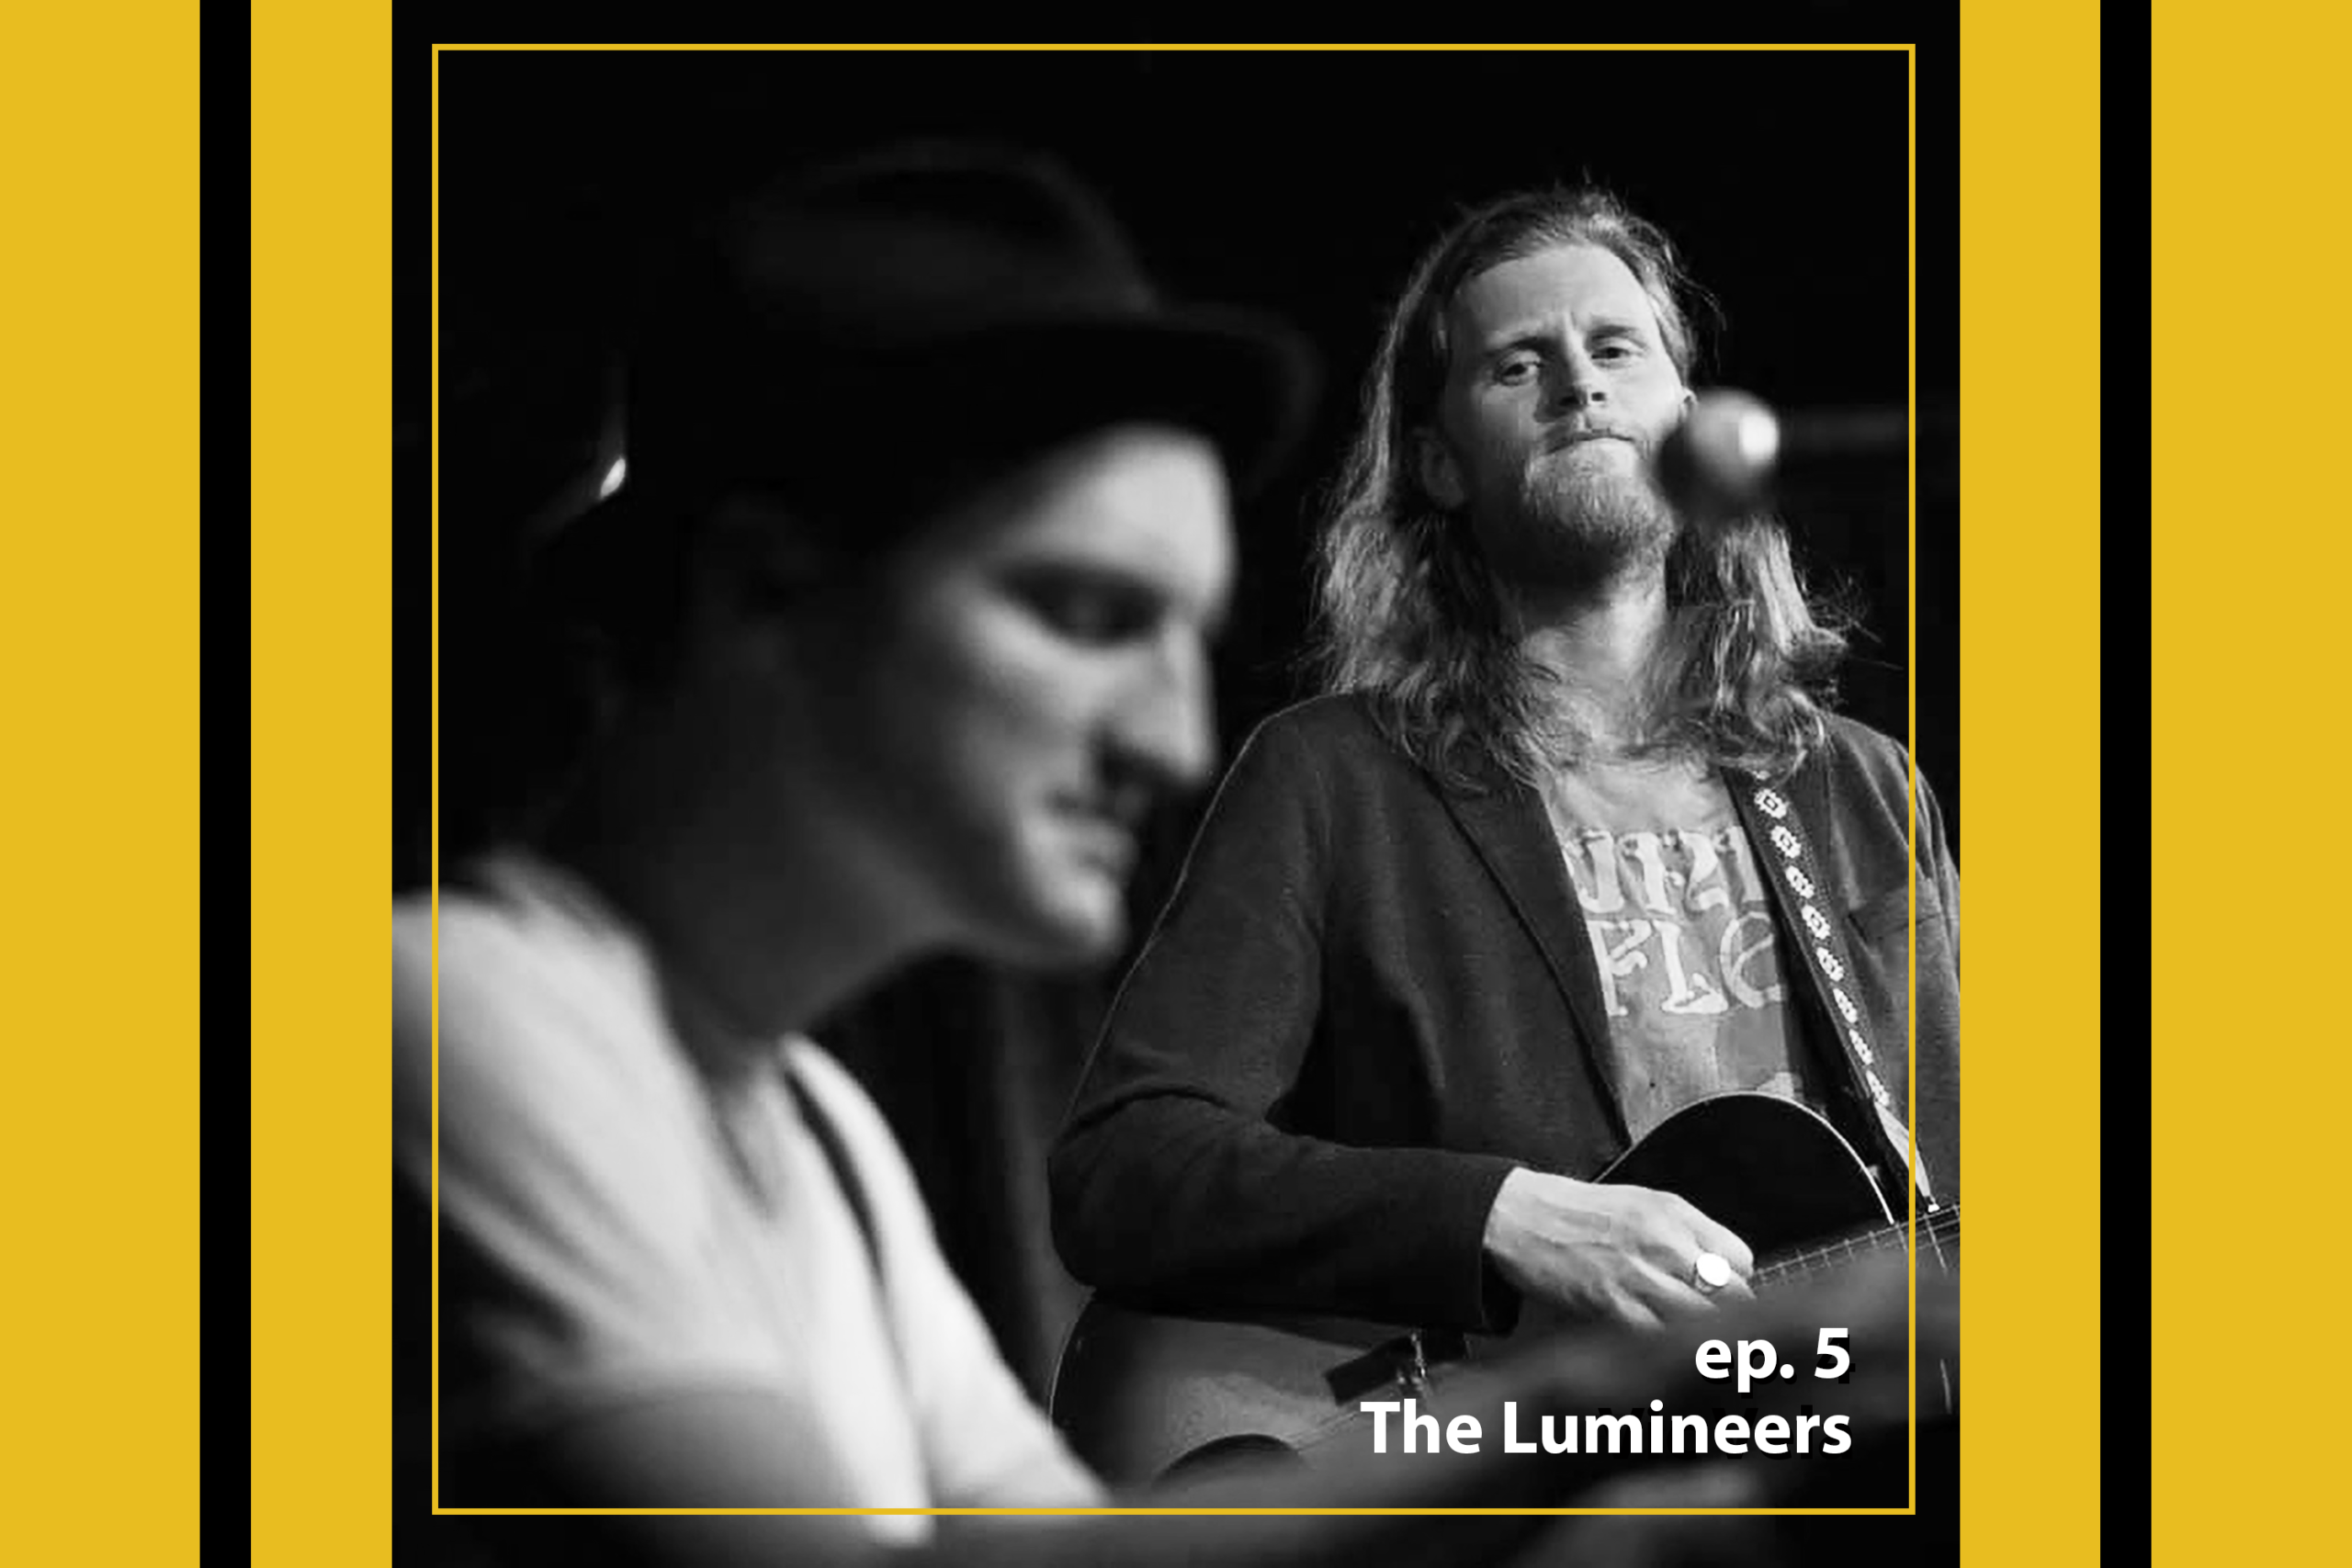 The Lumineers on Back From Broken episode 5